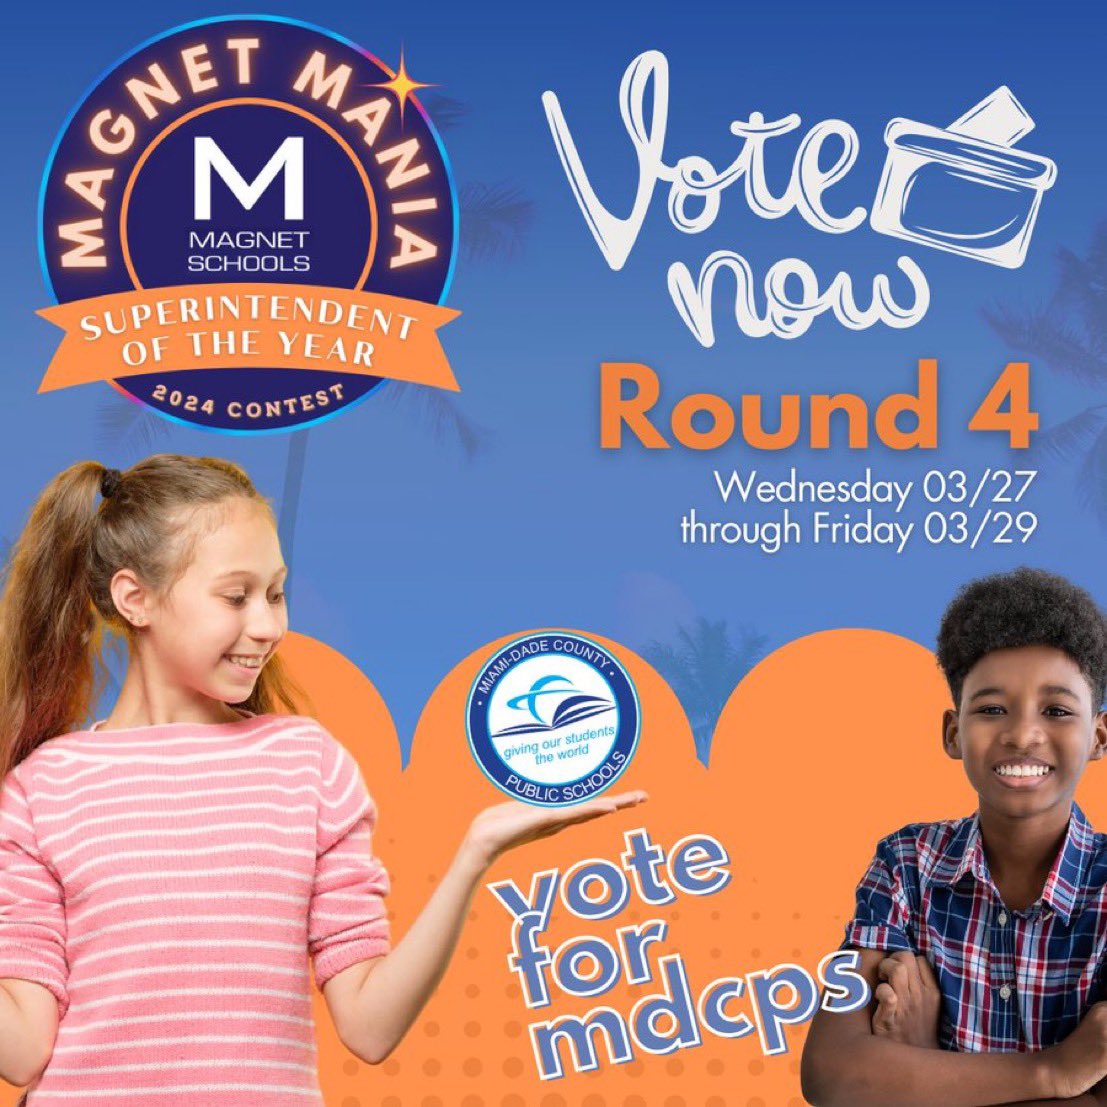 Every vote counts! Let’s rally together and cast our votes for M-DCPS in the Magnet Mania SOY Contest! Voting is open from 03/27 to 03/29. Let’s make it happen! 🗳️ Vote here: shorturl.at/pFGP1 #YourBestChoiceMDCPS #MagnetMania